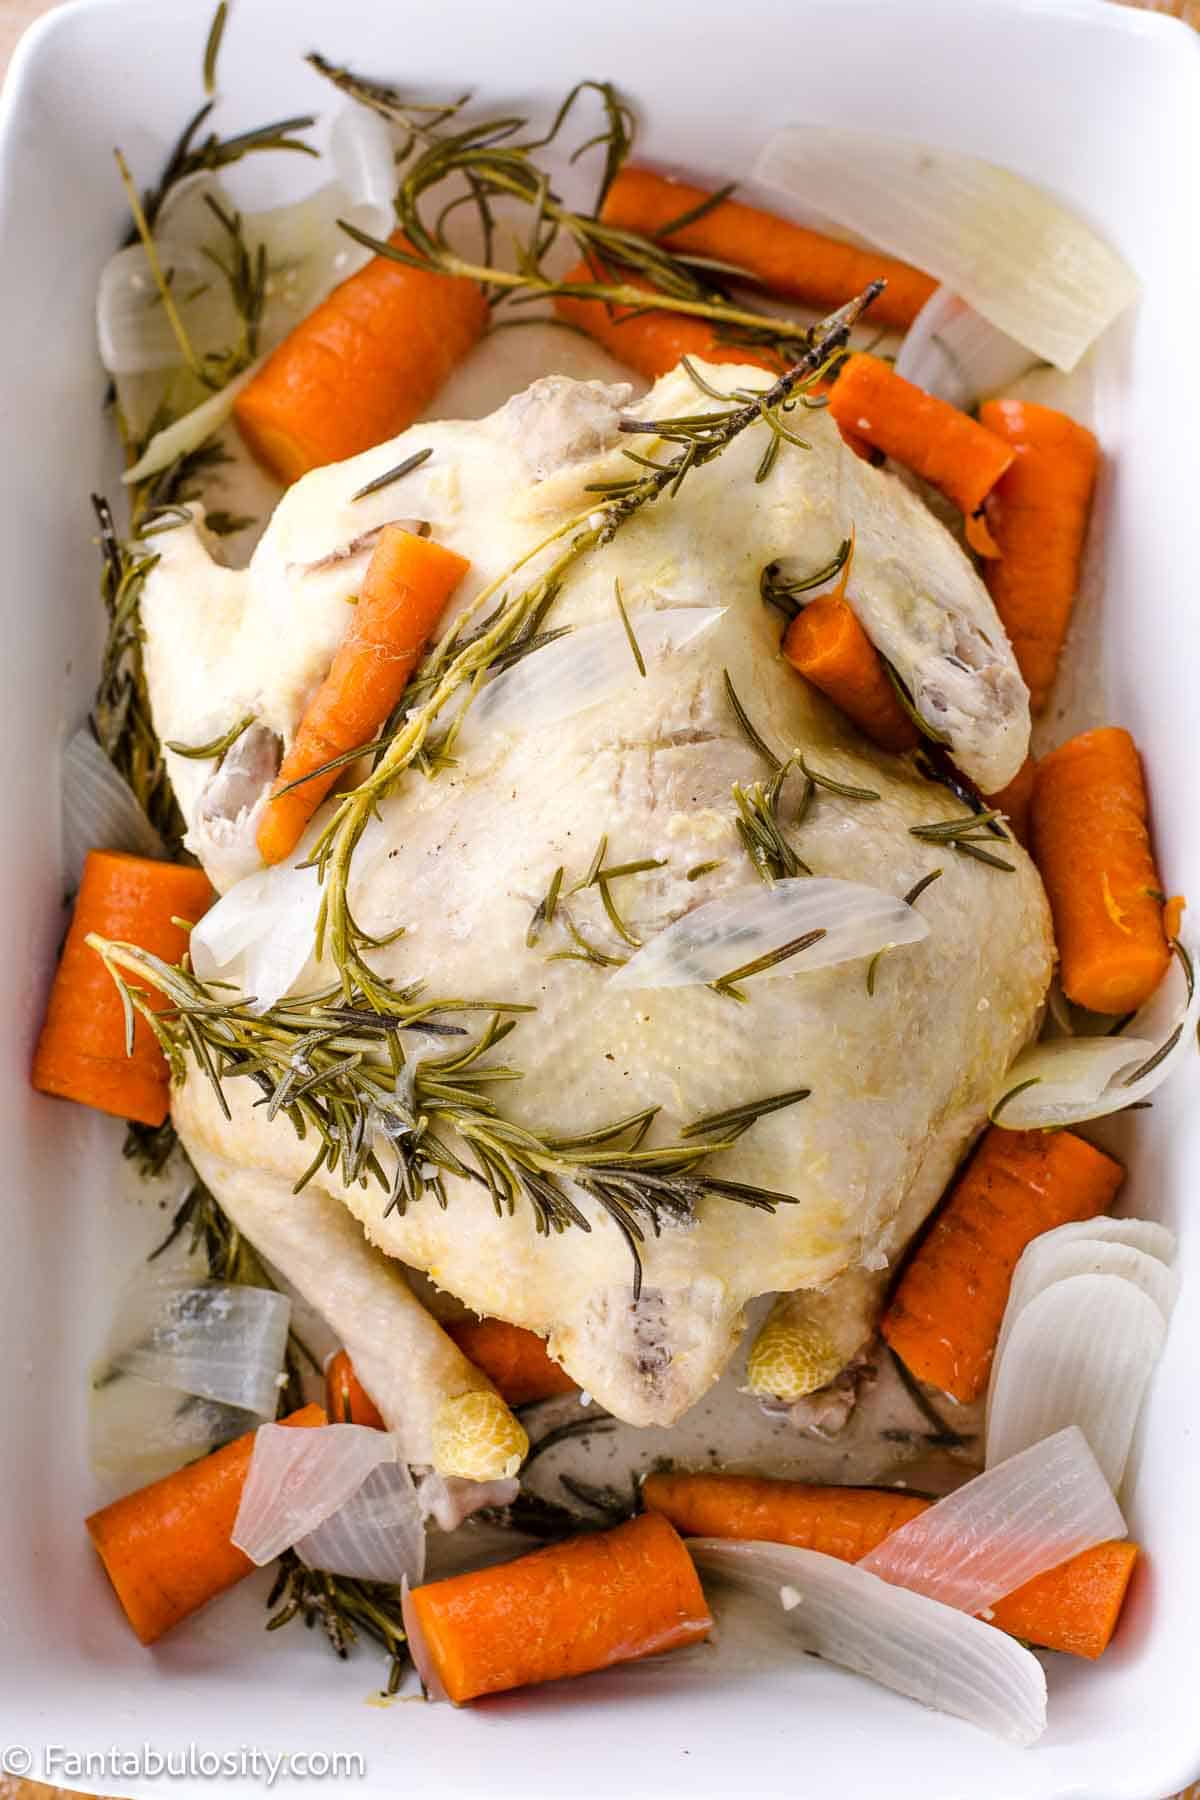 Cooked whole chicken in white dish, surrounded by vegetables and herbs.